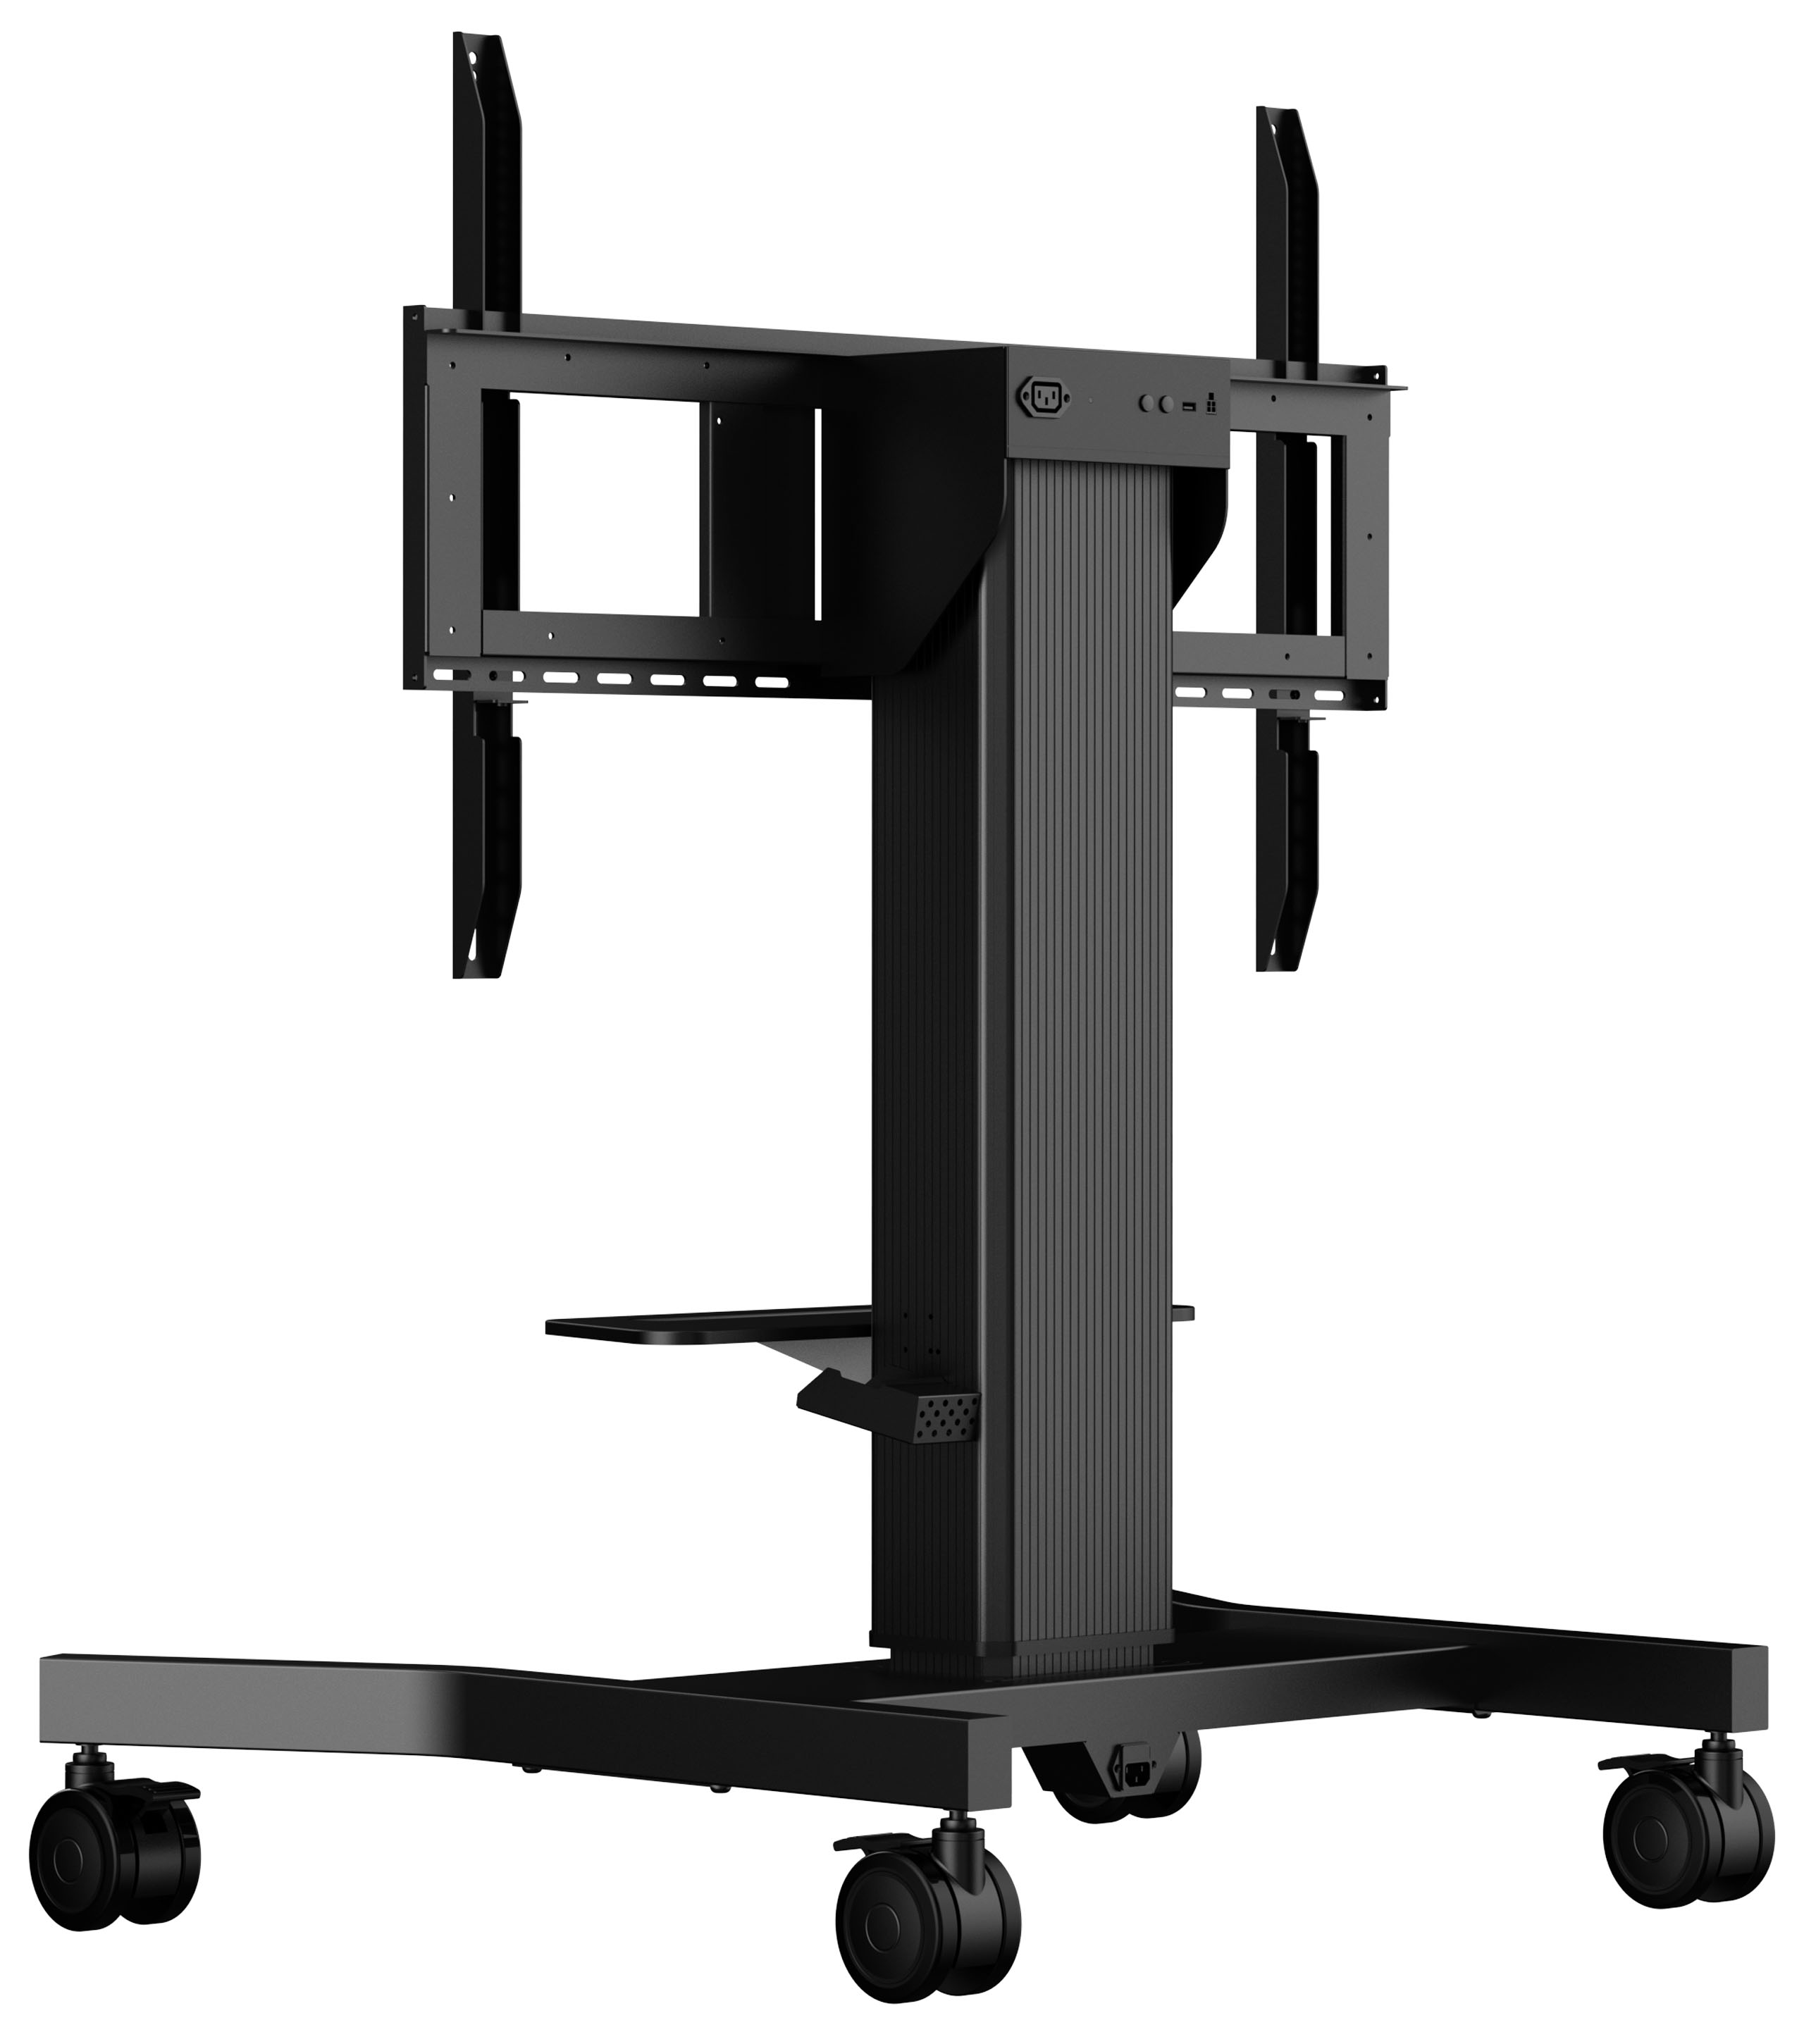 iiyama MD CAR1021-B1 - electric height adjustable trolley - for LFD up to 86 inch - VESA 800x600 mm - up to 100 kg